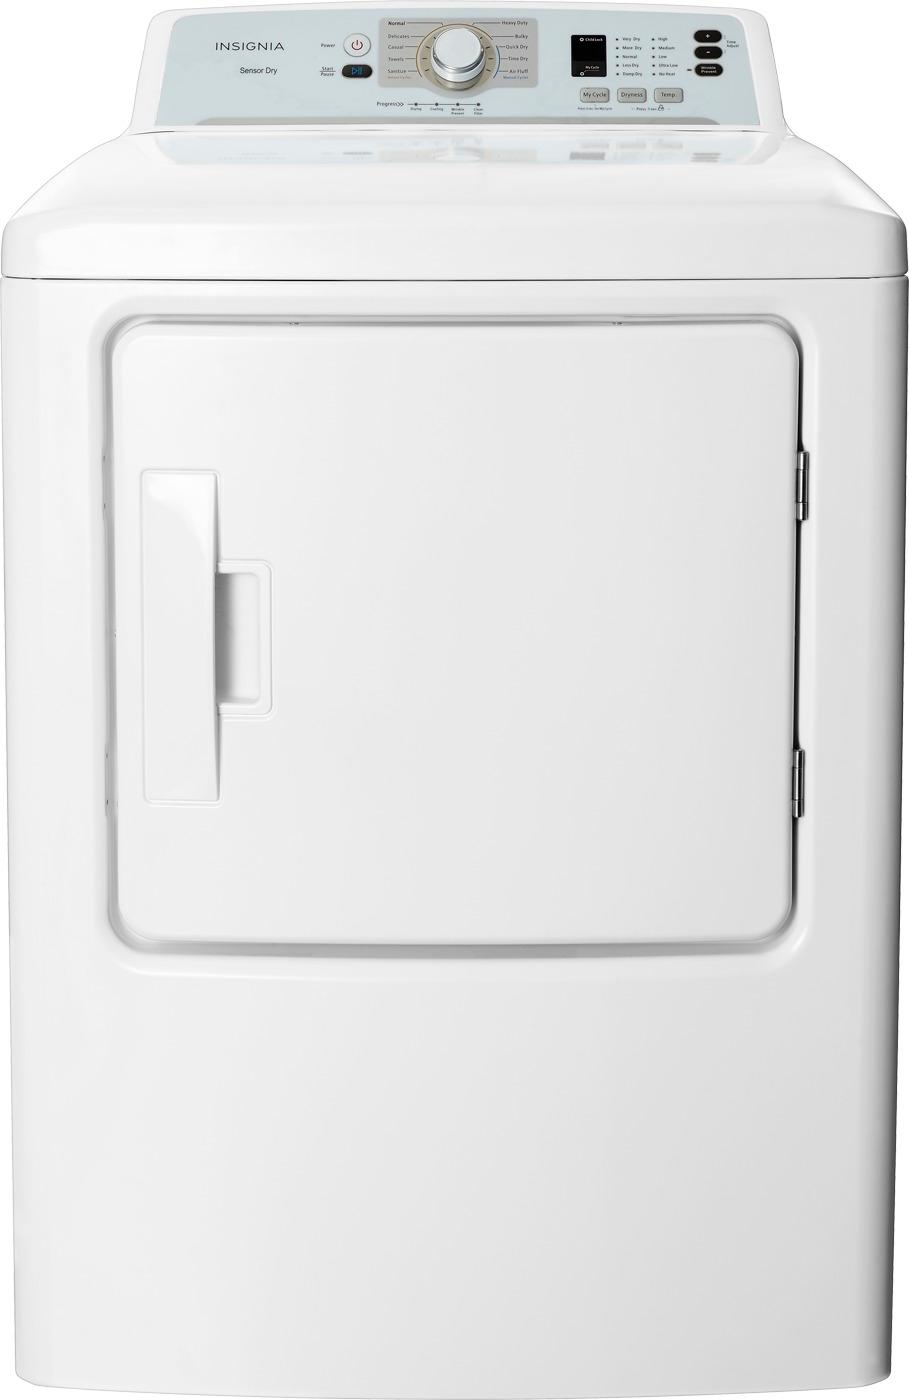 Amana 6.5 Cu. Ft. Electric Dryer with Automatic Dryness Control